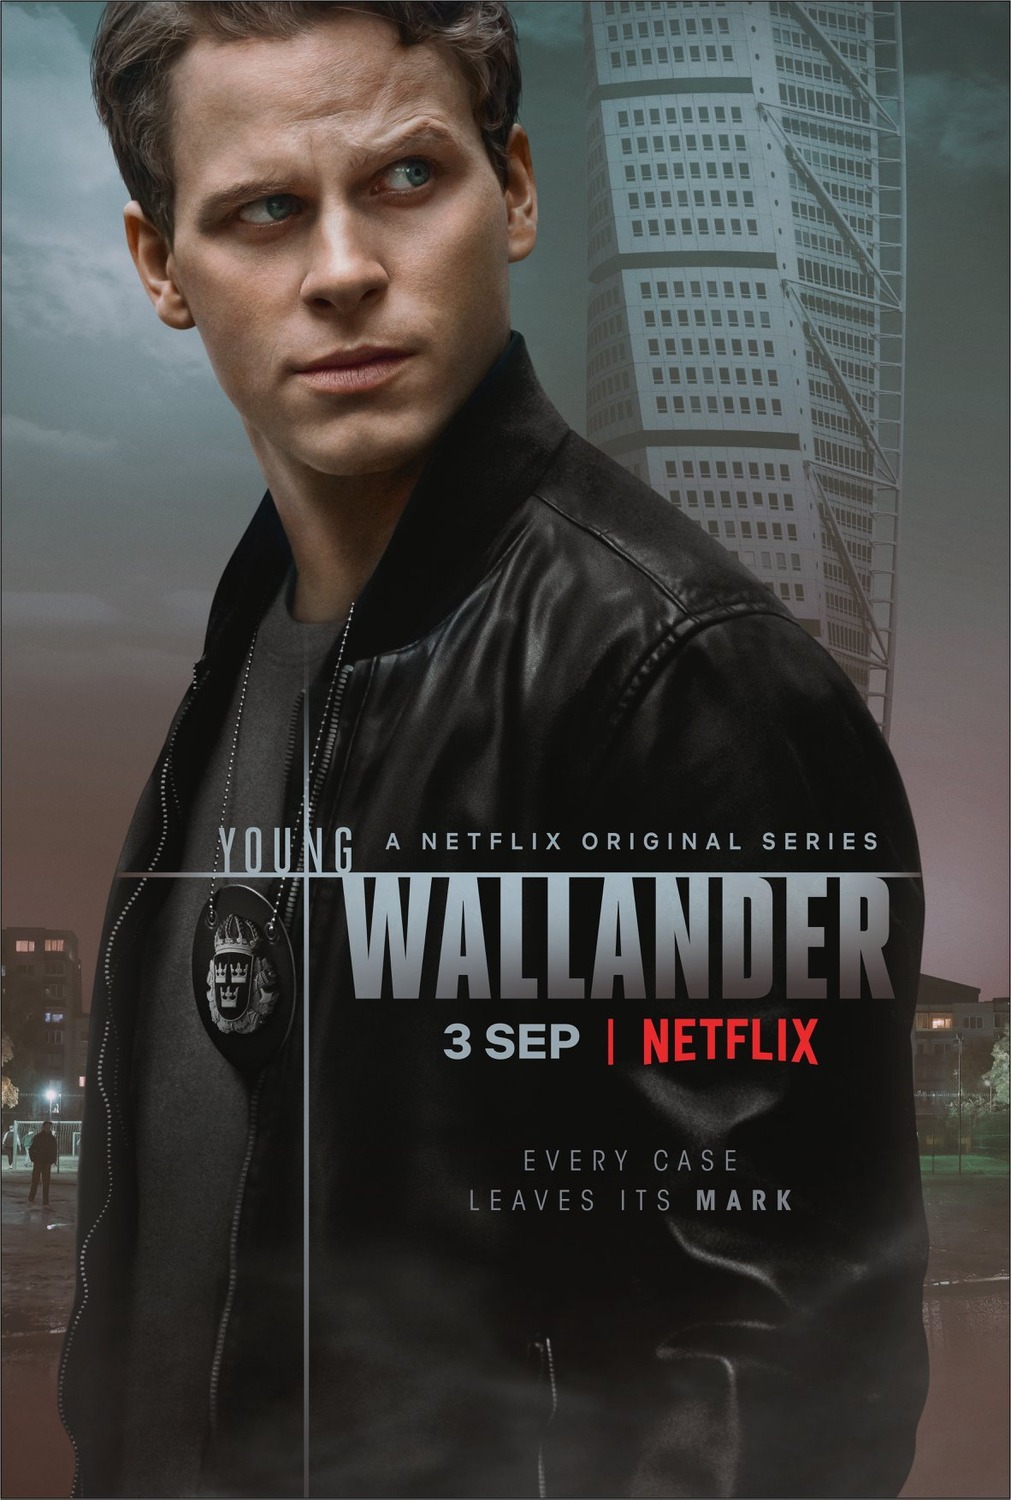 Extra Large TV Poster Image for Young Wallander 